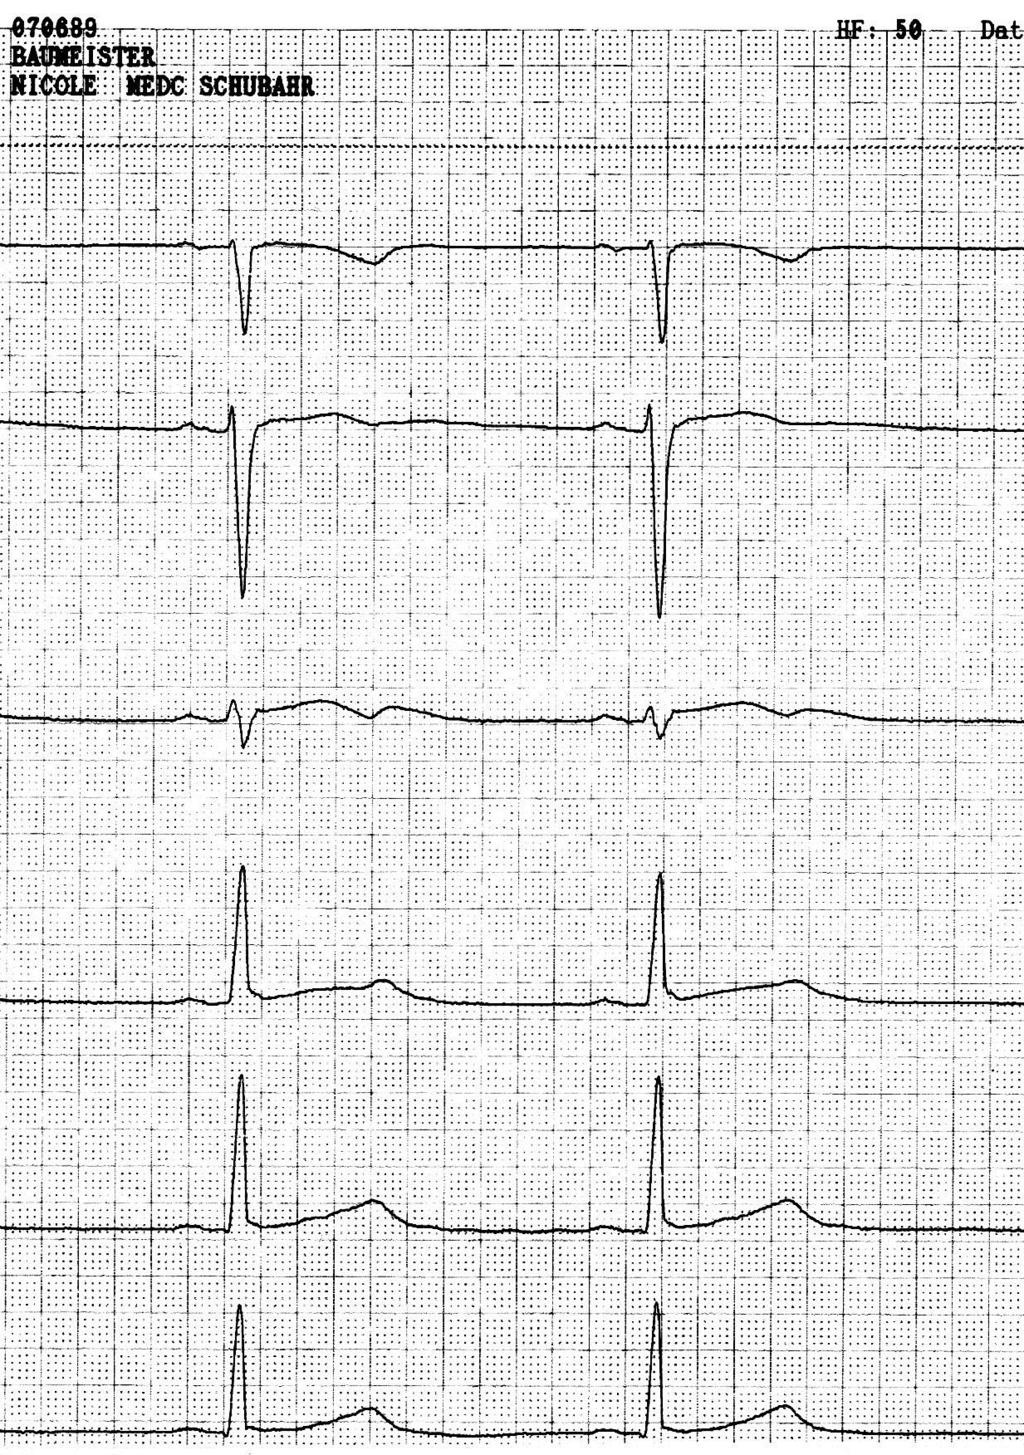 629 ms QTc: 547 ms ECG of the proband s sister, 16-y